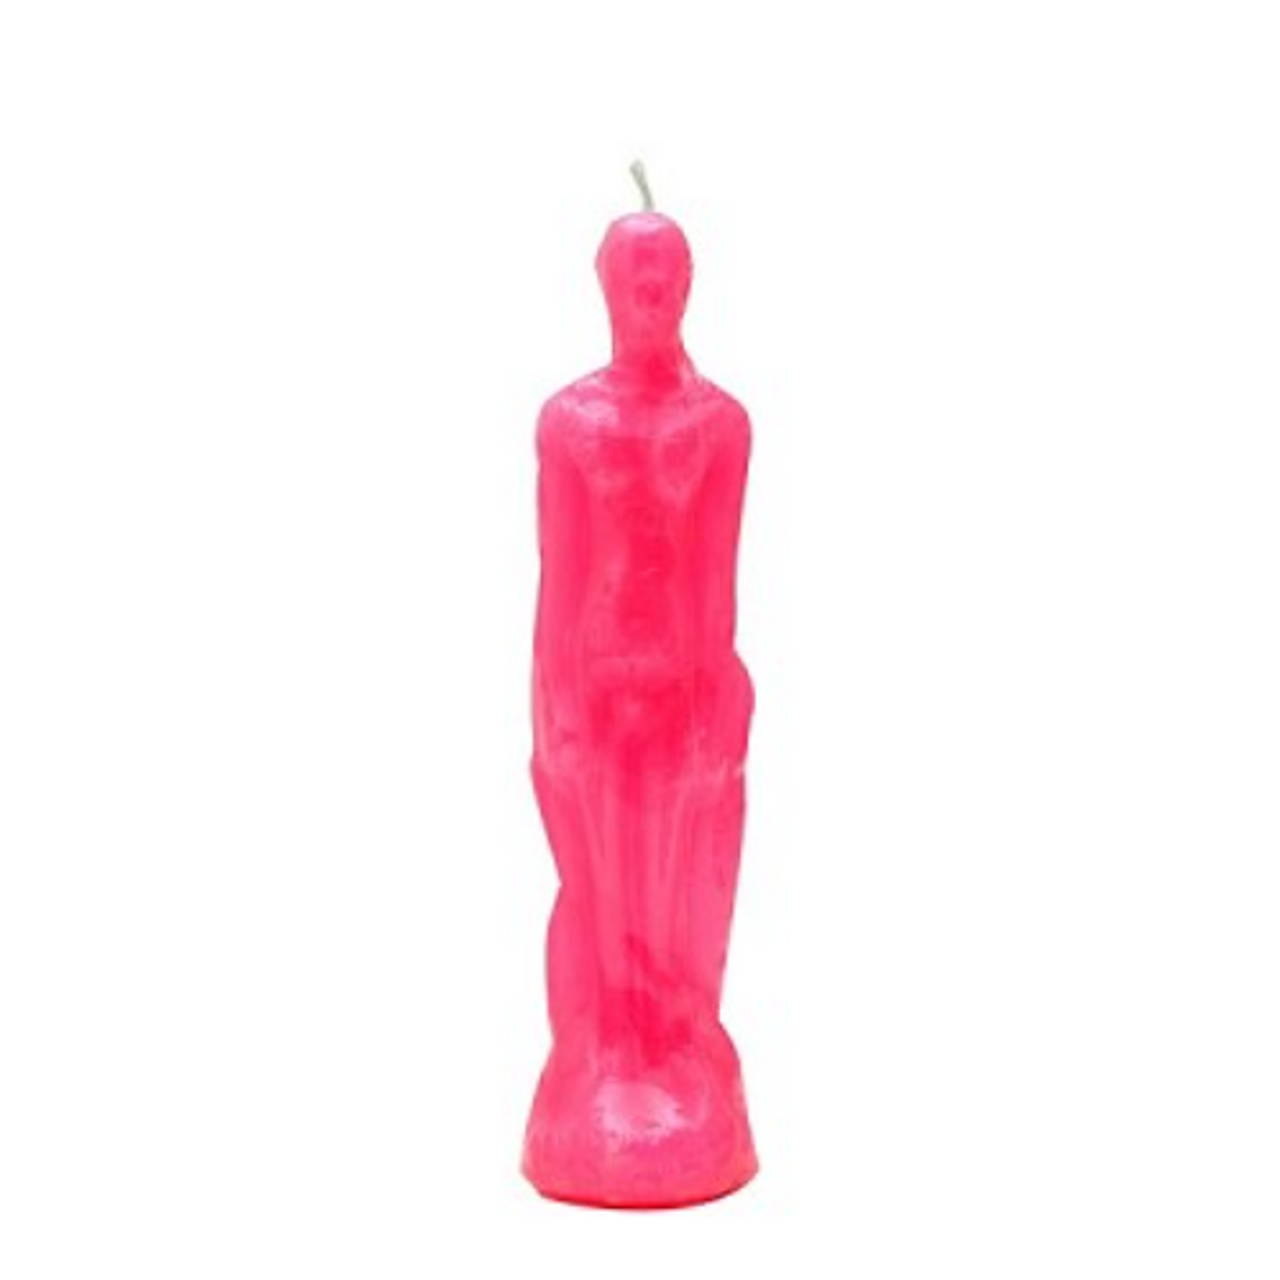 Candle Male Standing Figure 6.5" or 7" - Select Type